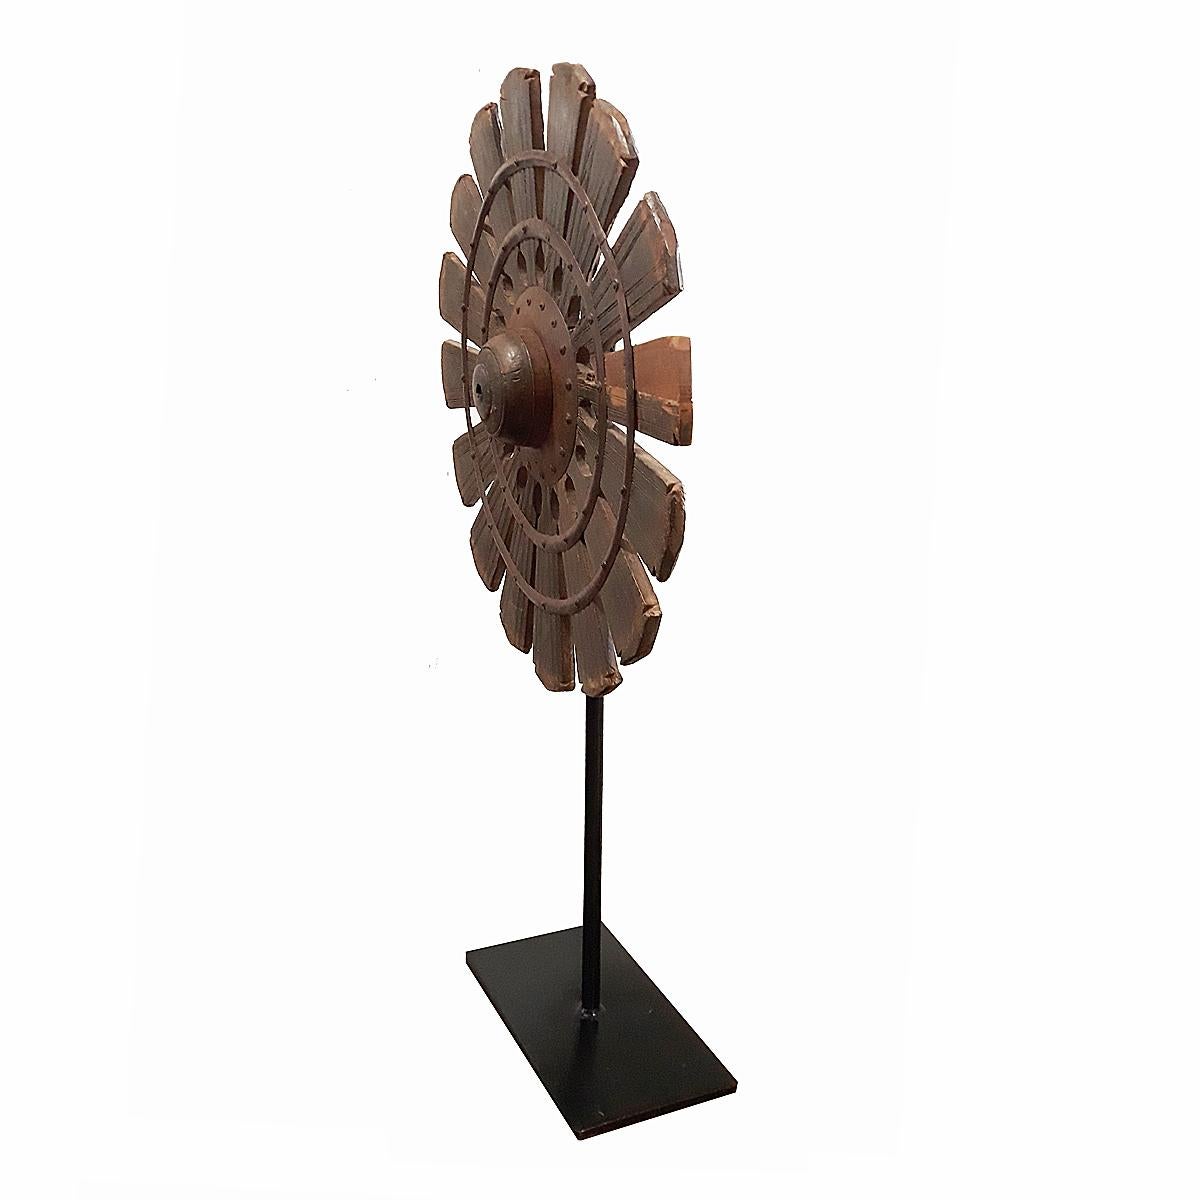 Once a part of an antique  loom, this spinning wheel was hand carved out of a single piece of teak wood, with iron center and rivets. Mounted on a black metal stand.